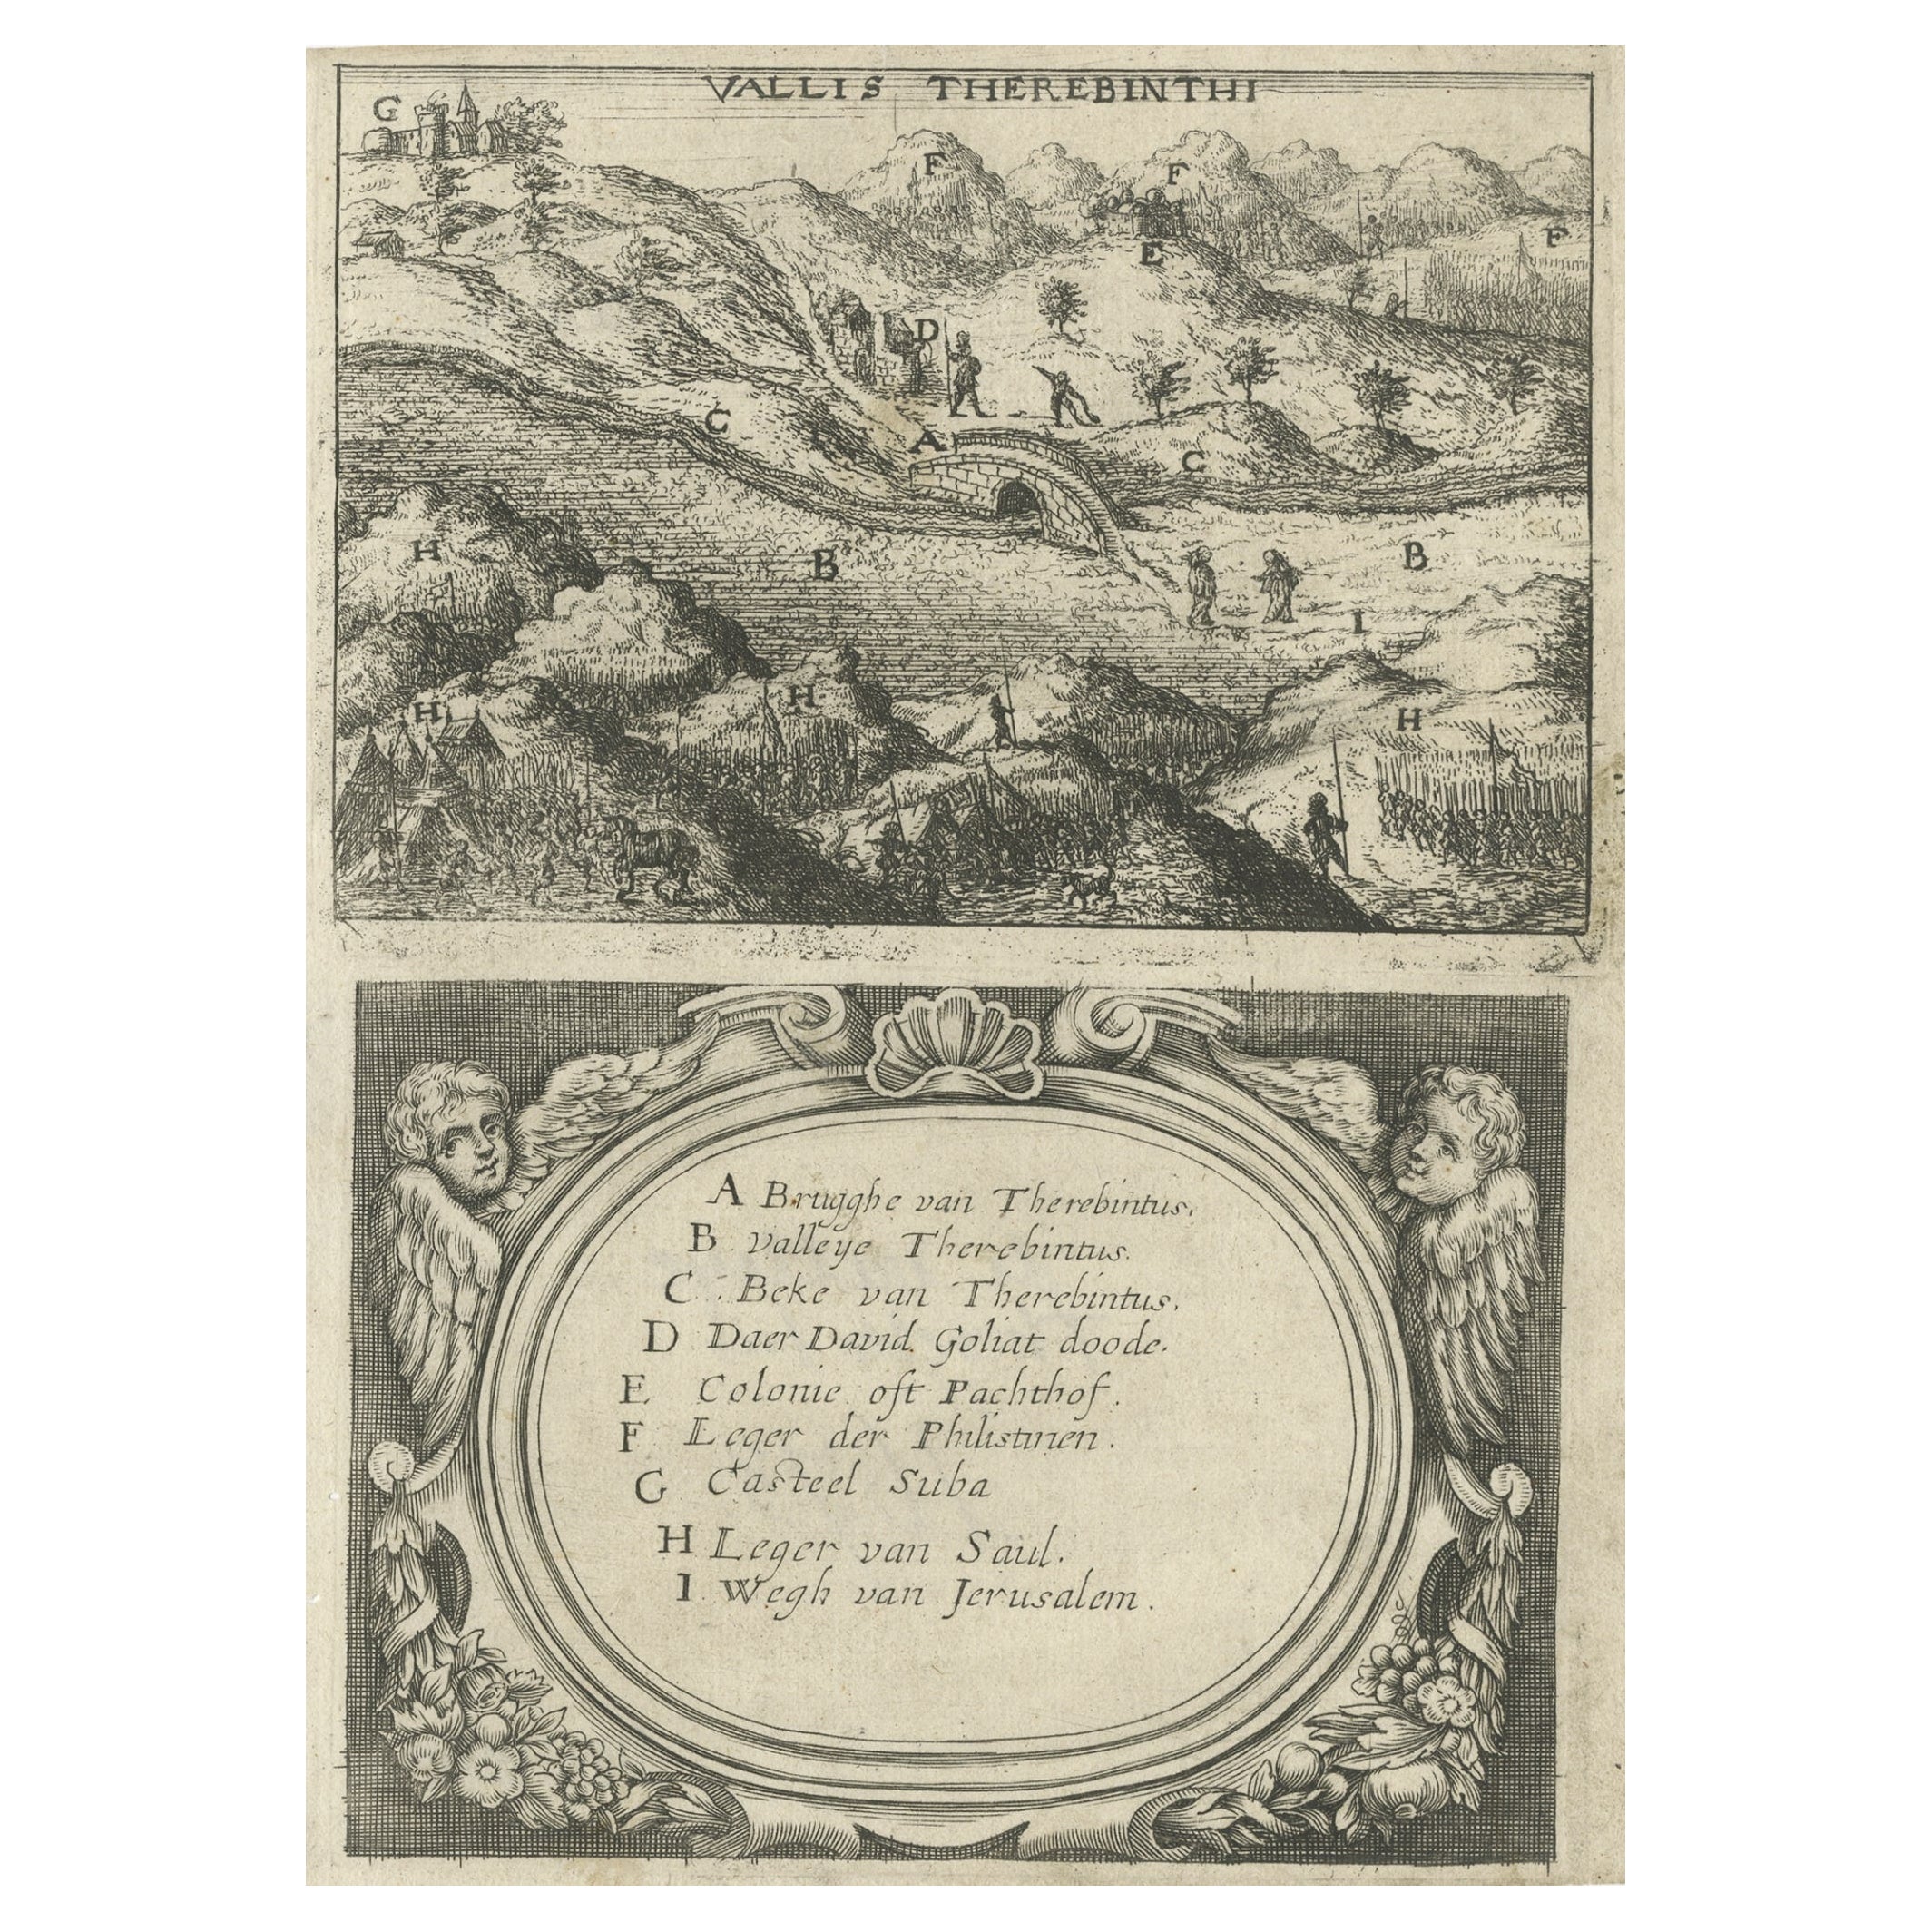 Very Rare Antique Print of the Valley of Terebinthus in Arabia, 1673